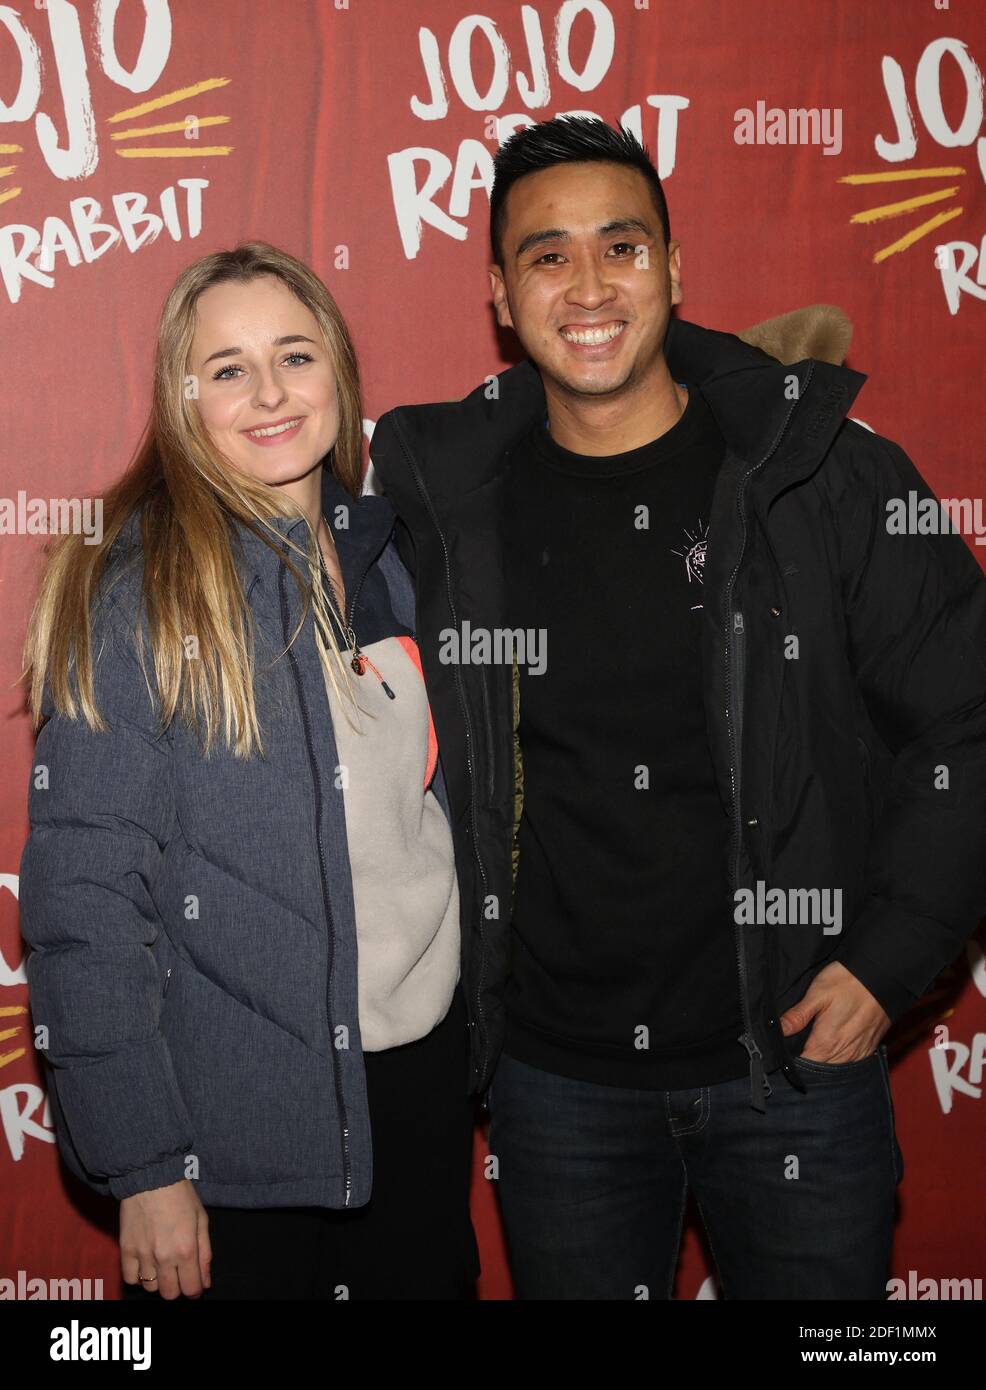 Fred Van Long and girlfriend Camille attending the premiere of Jojo Rabbit  held at UGC Les Halles Cinema on January 23, 2020 in Paris, France. Photo  by Denis Guignebourg/ABACAPRESS.COM Stock Photo -